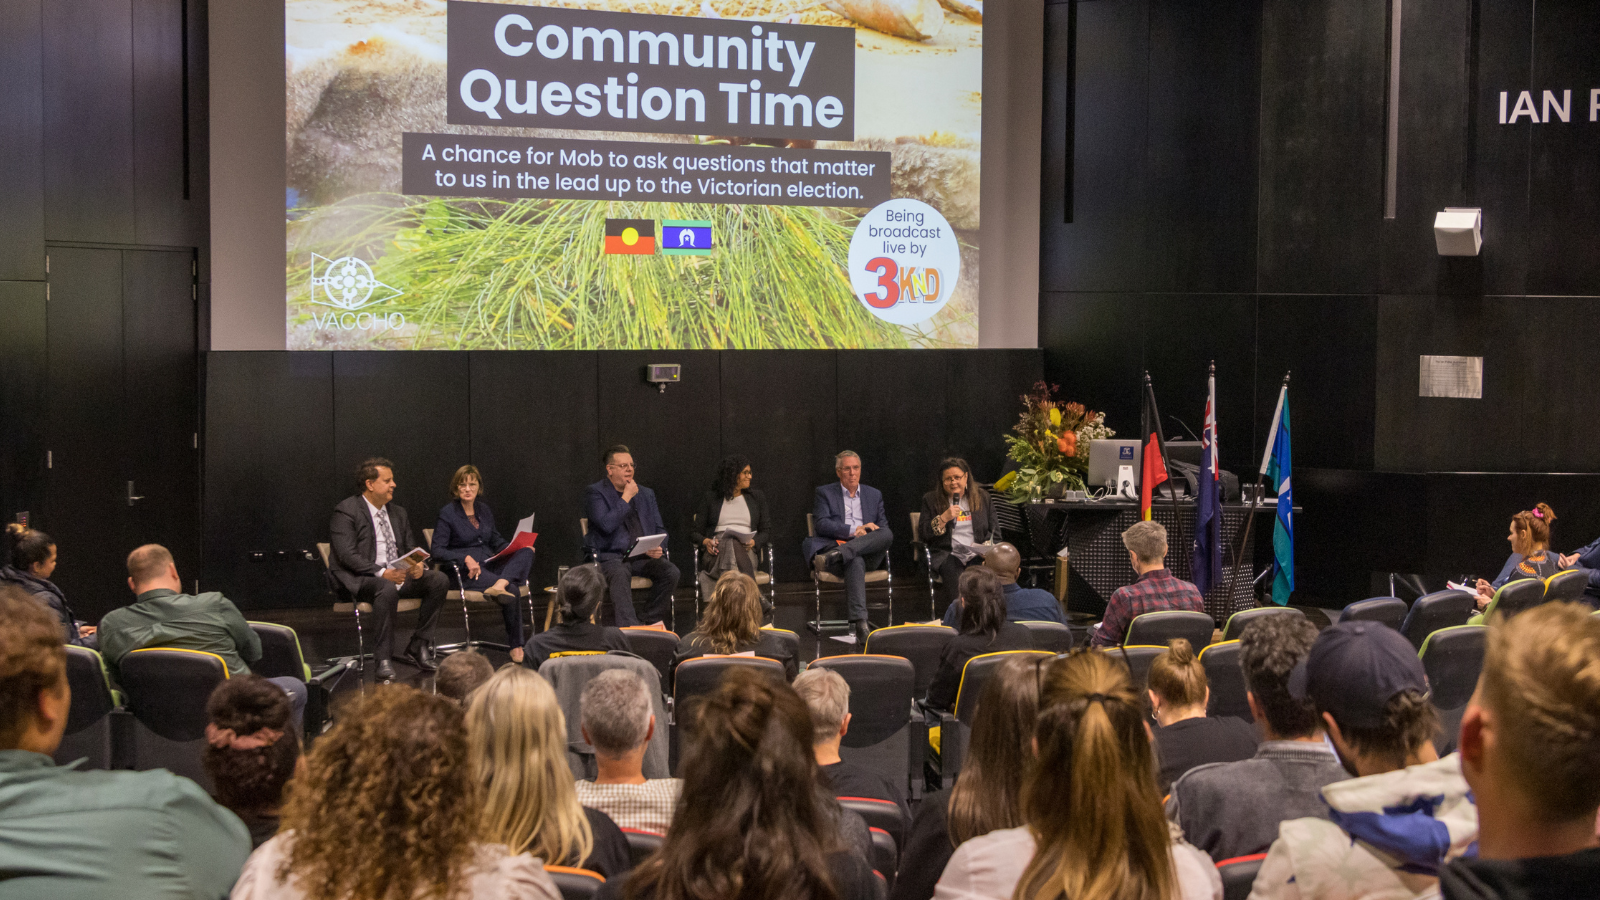 VACCHO’S COMMUNITY QUESTION TIME A GAMECHANGER AHEAD OF 2022 STATE ELECTION